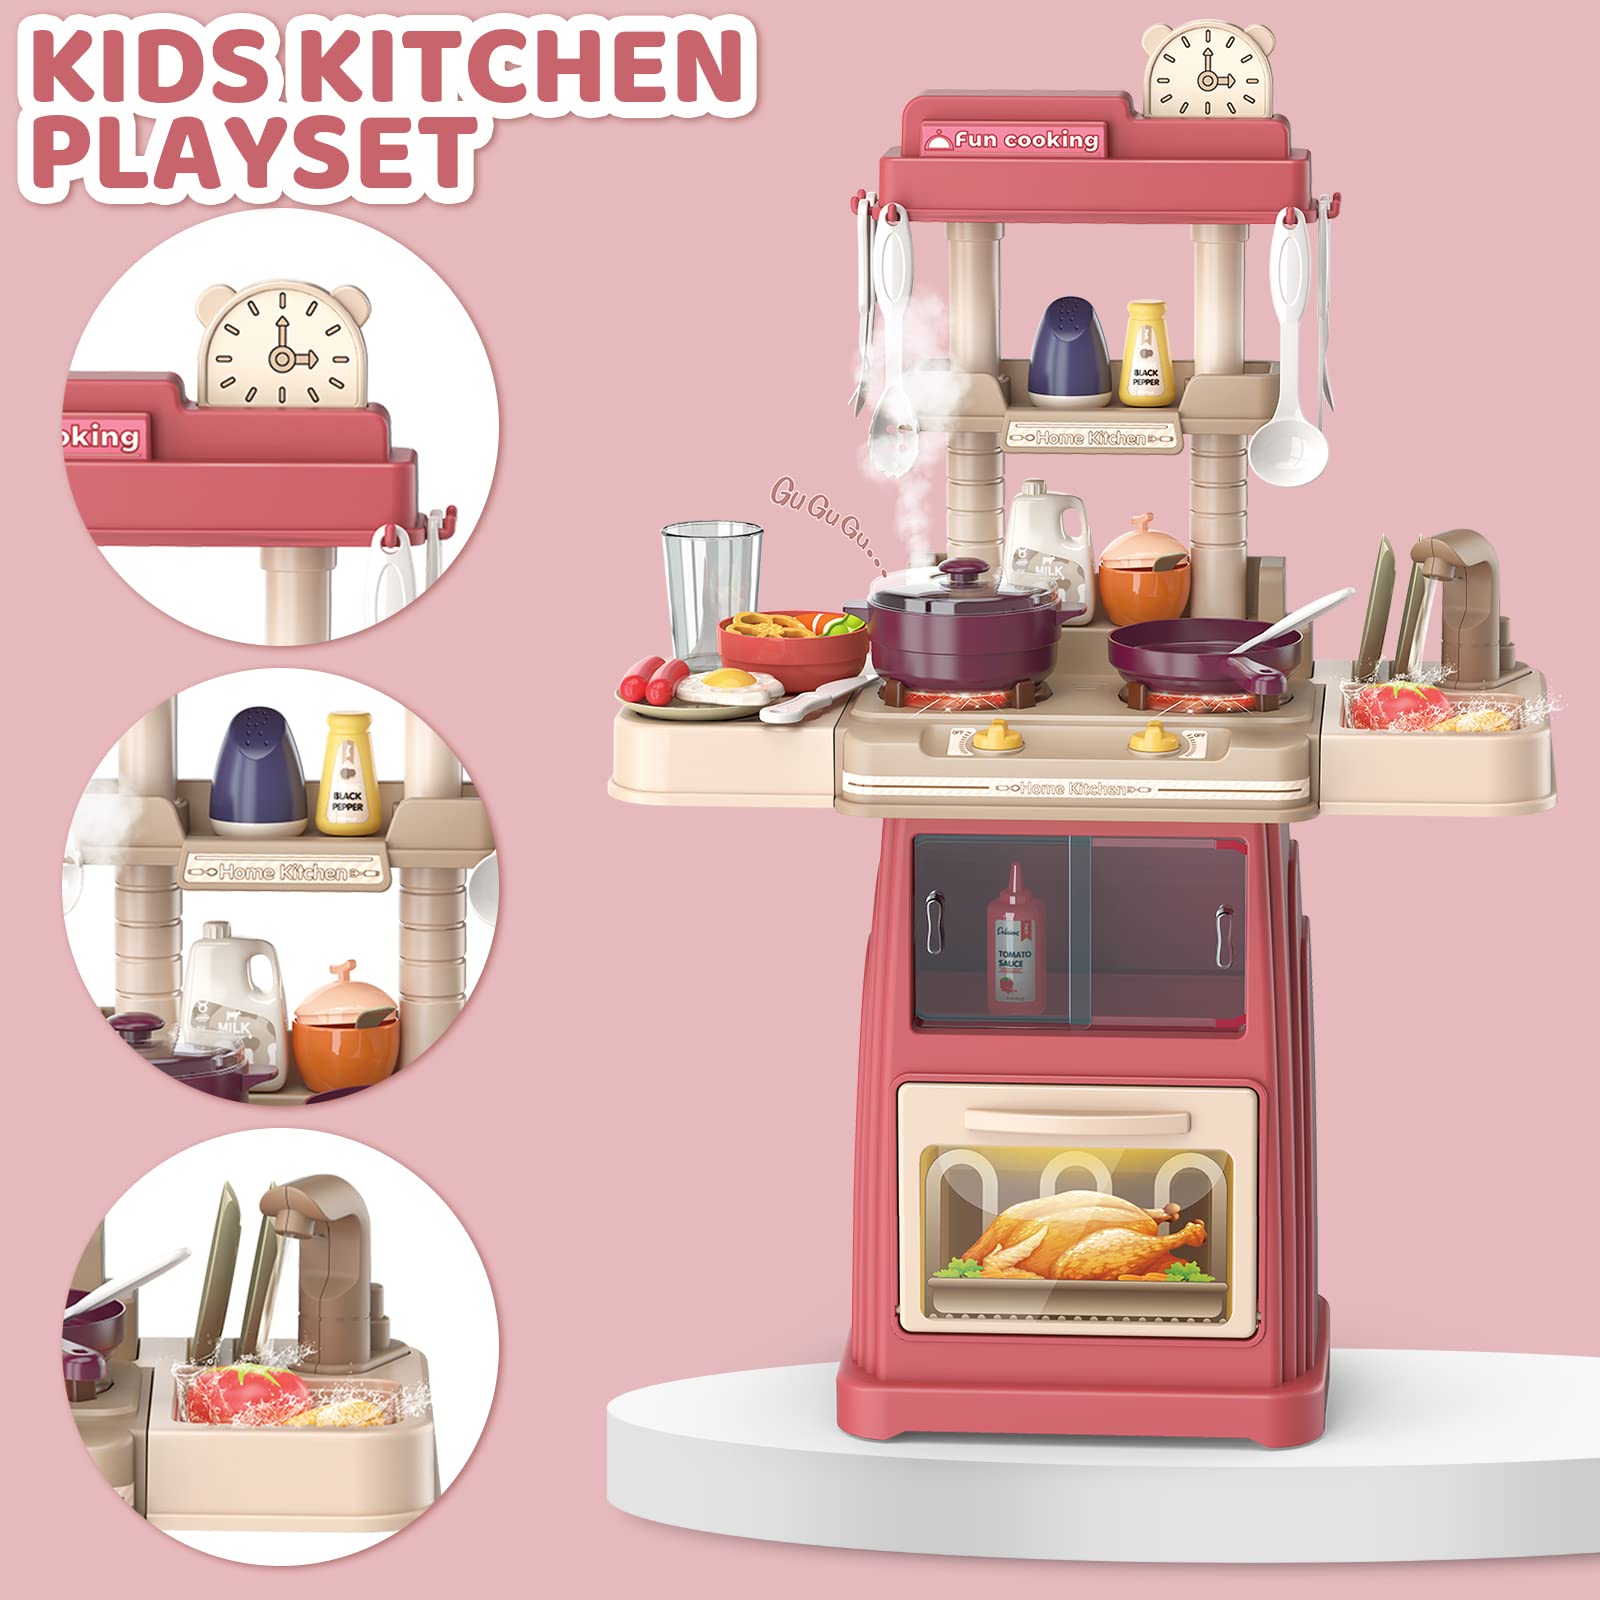 deAO Kitchen Toys for Kids Kitchen Playset Toy,Role Play Game Pretend Food and Cooking Playset (red)